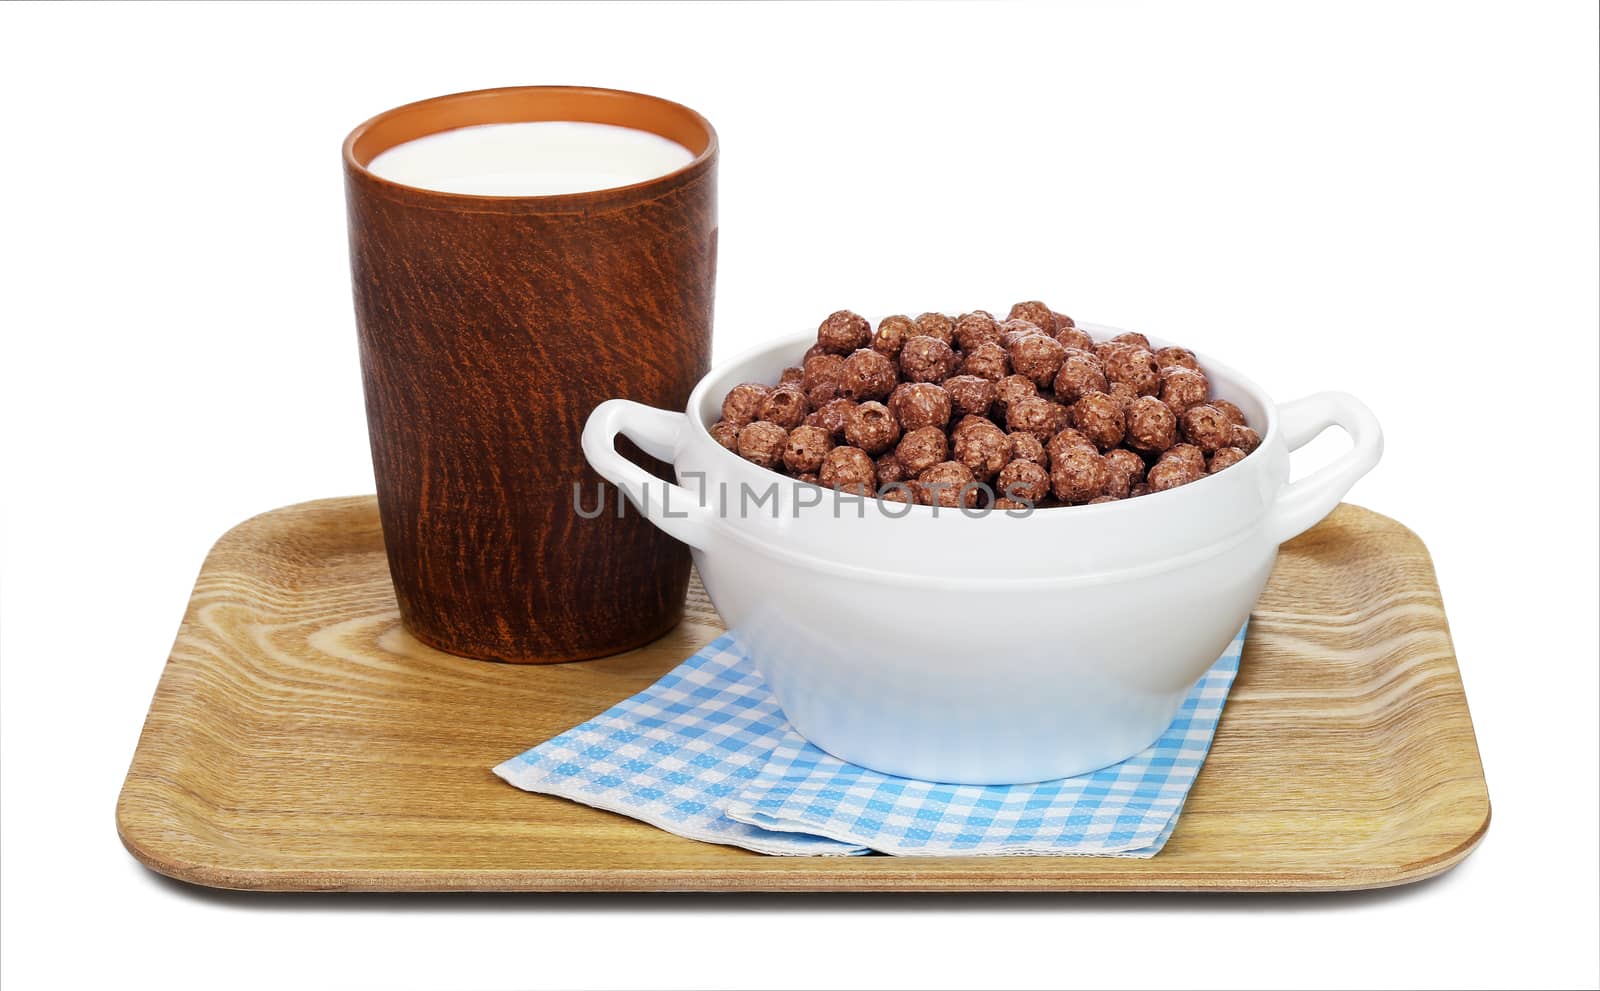 Chocolate cereal balls in a white bowl and a ceramic mug with milk on a wooden tray with paper napkins, isolated on white background.